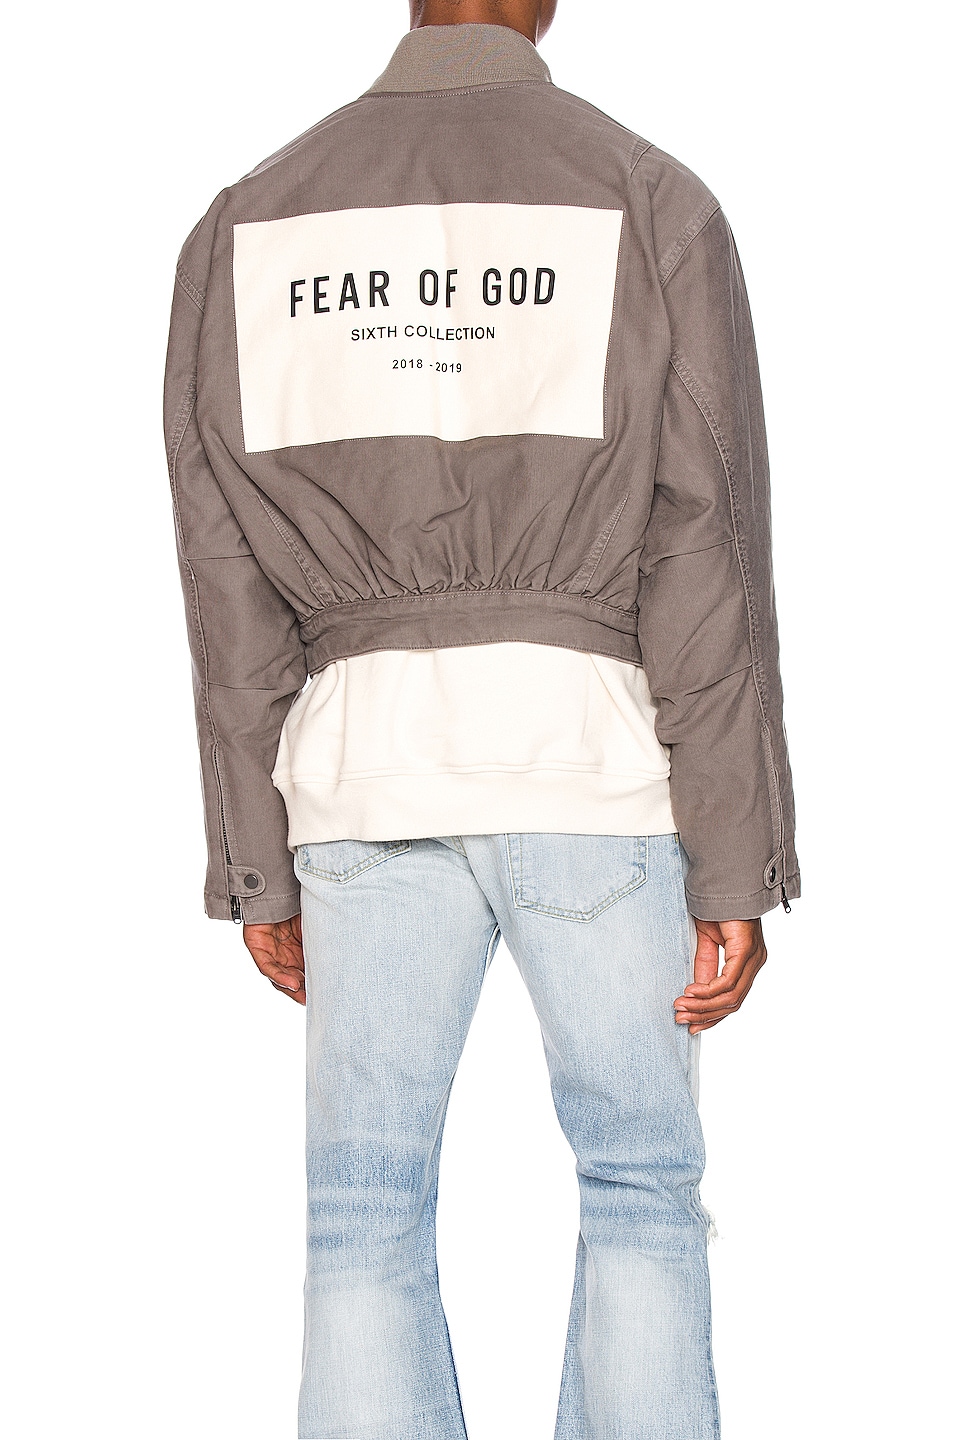 Fear of God 6th Collection Bomber Jacket in God Grey | FWRD